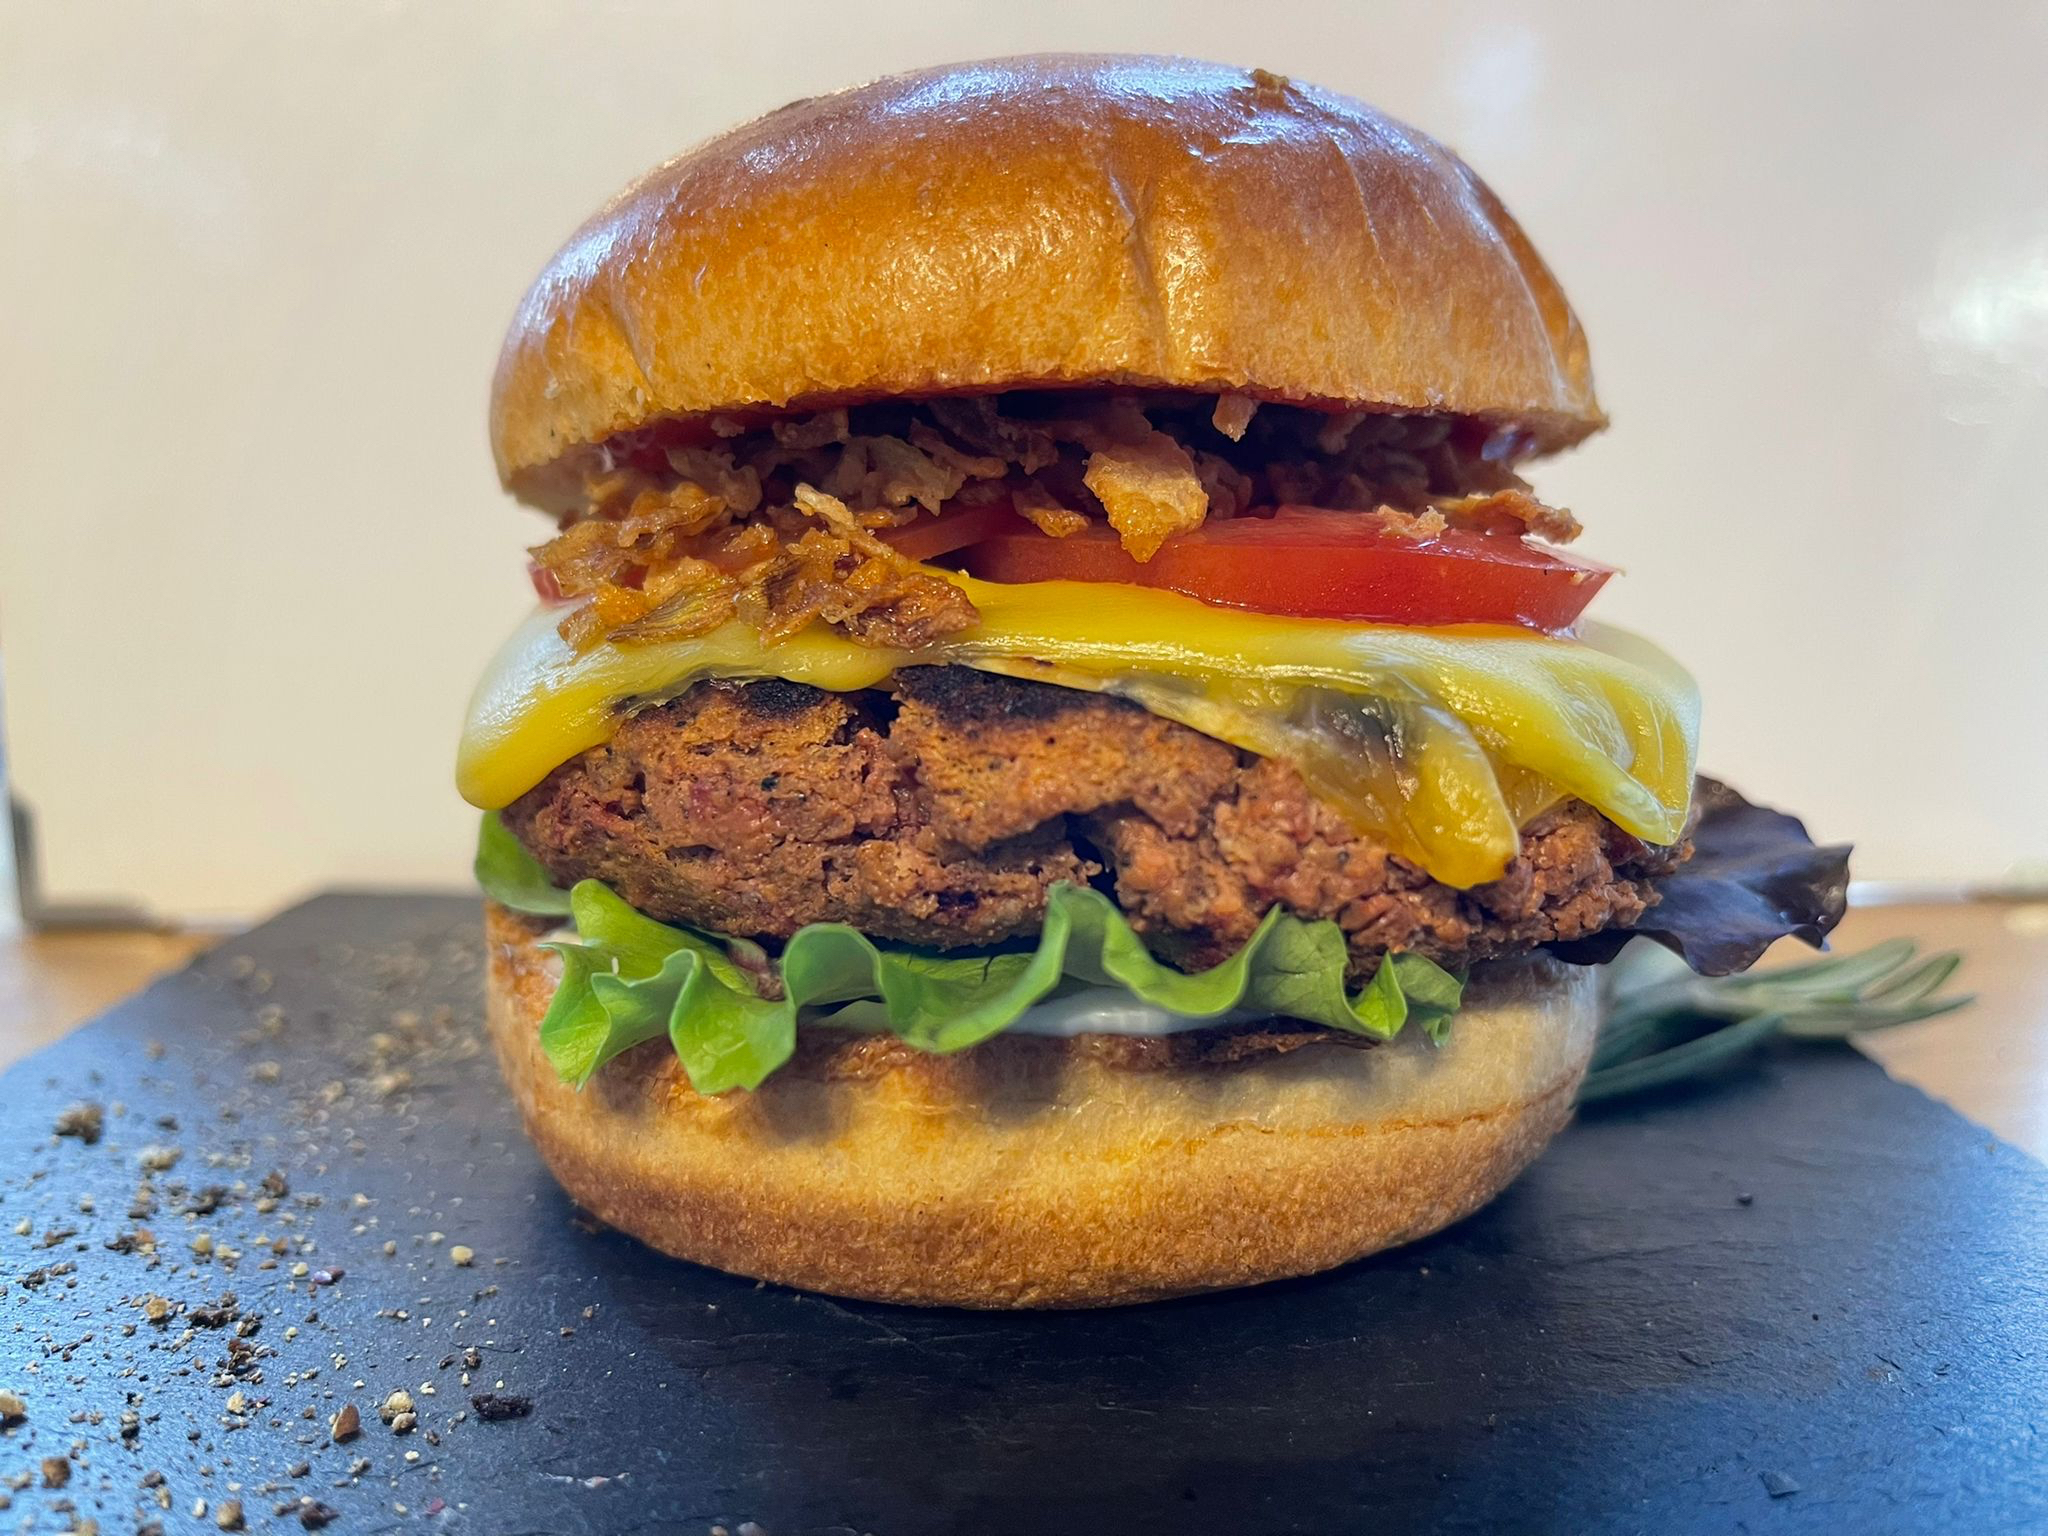 Close-up photo of a burger with meat substitute patty made from hemp.